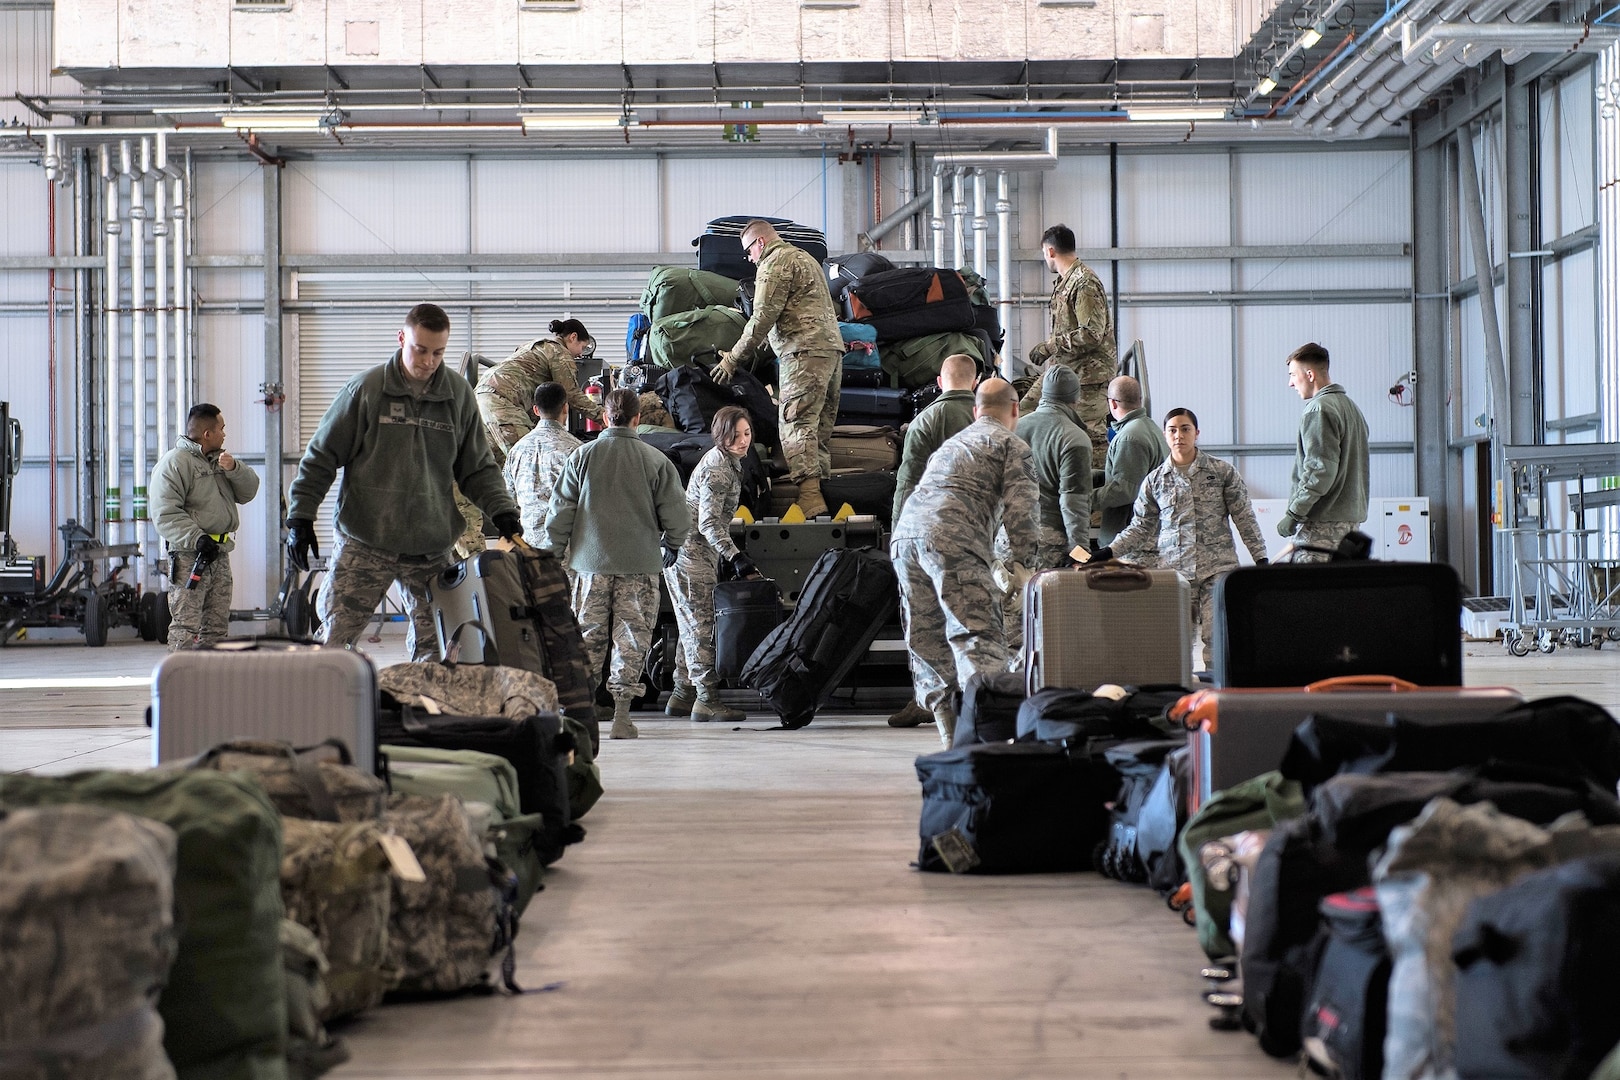 Airmen deployed from Barksdale Air Force Base, La., unload baggage at RAF Fairford, England, March 11, 2019. The Airmen deployed to support U.S. Strategic Command’s Bomber Task Force (BTF) in Europe which validates the readiness and capability of the command.